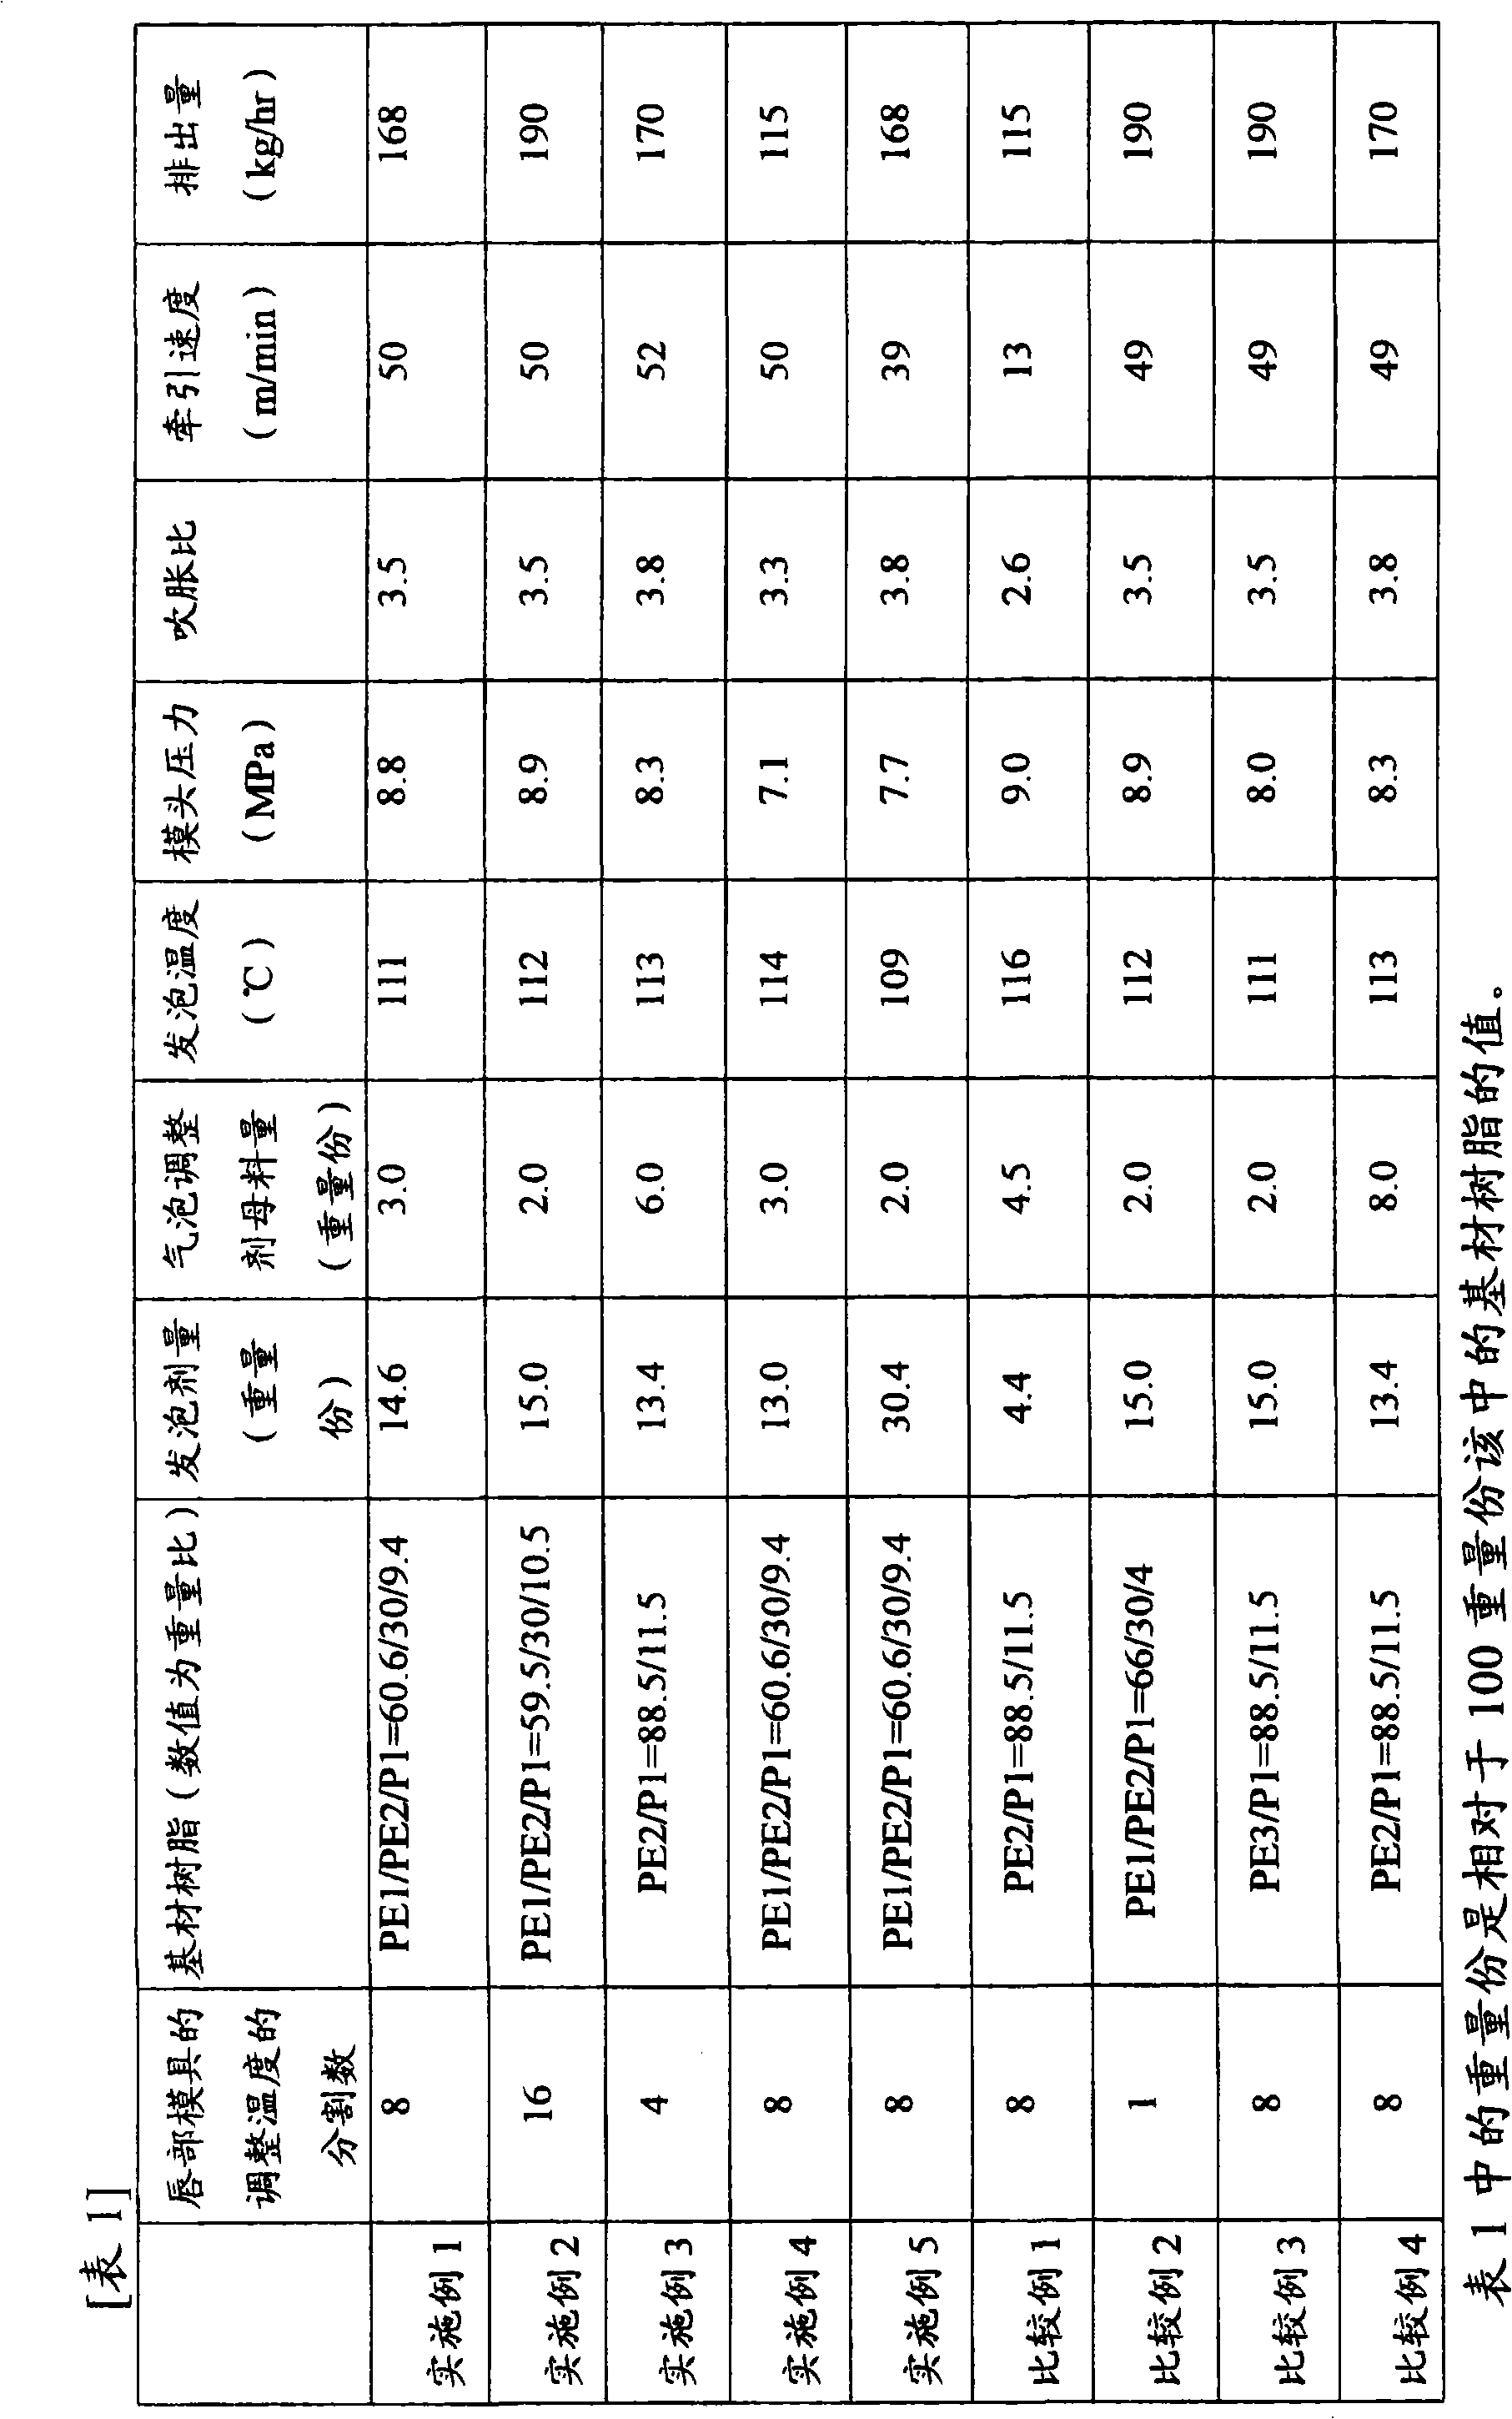 Spacing sheet for glass substrate